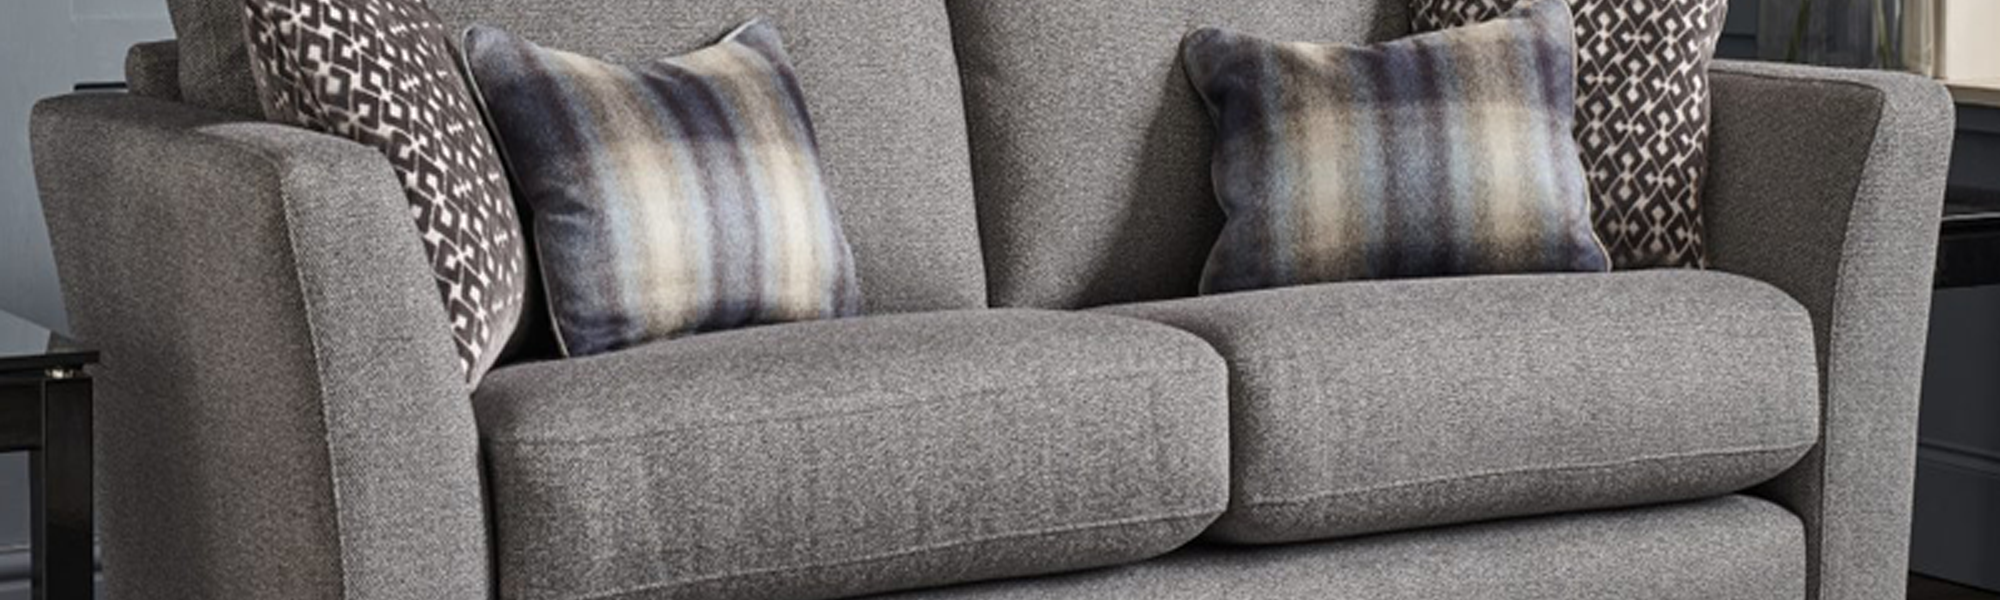 Compact 2 Fabric Seater Sofas